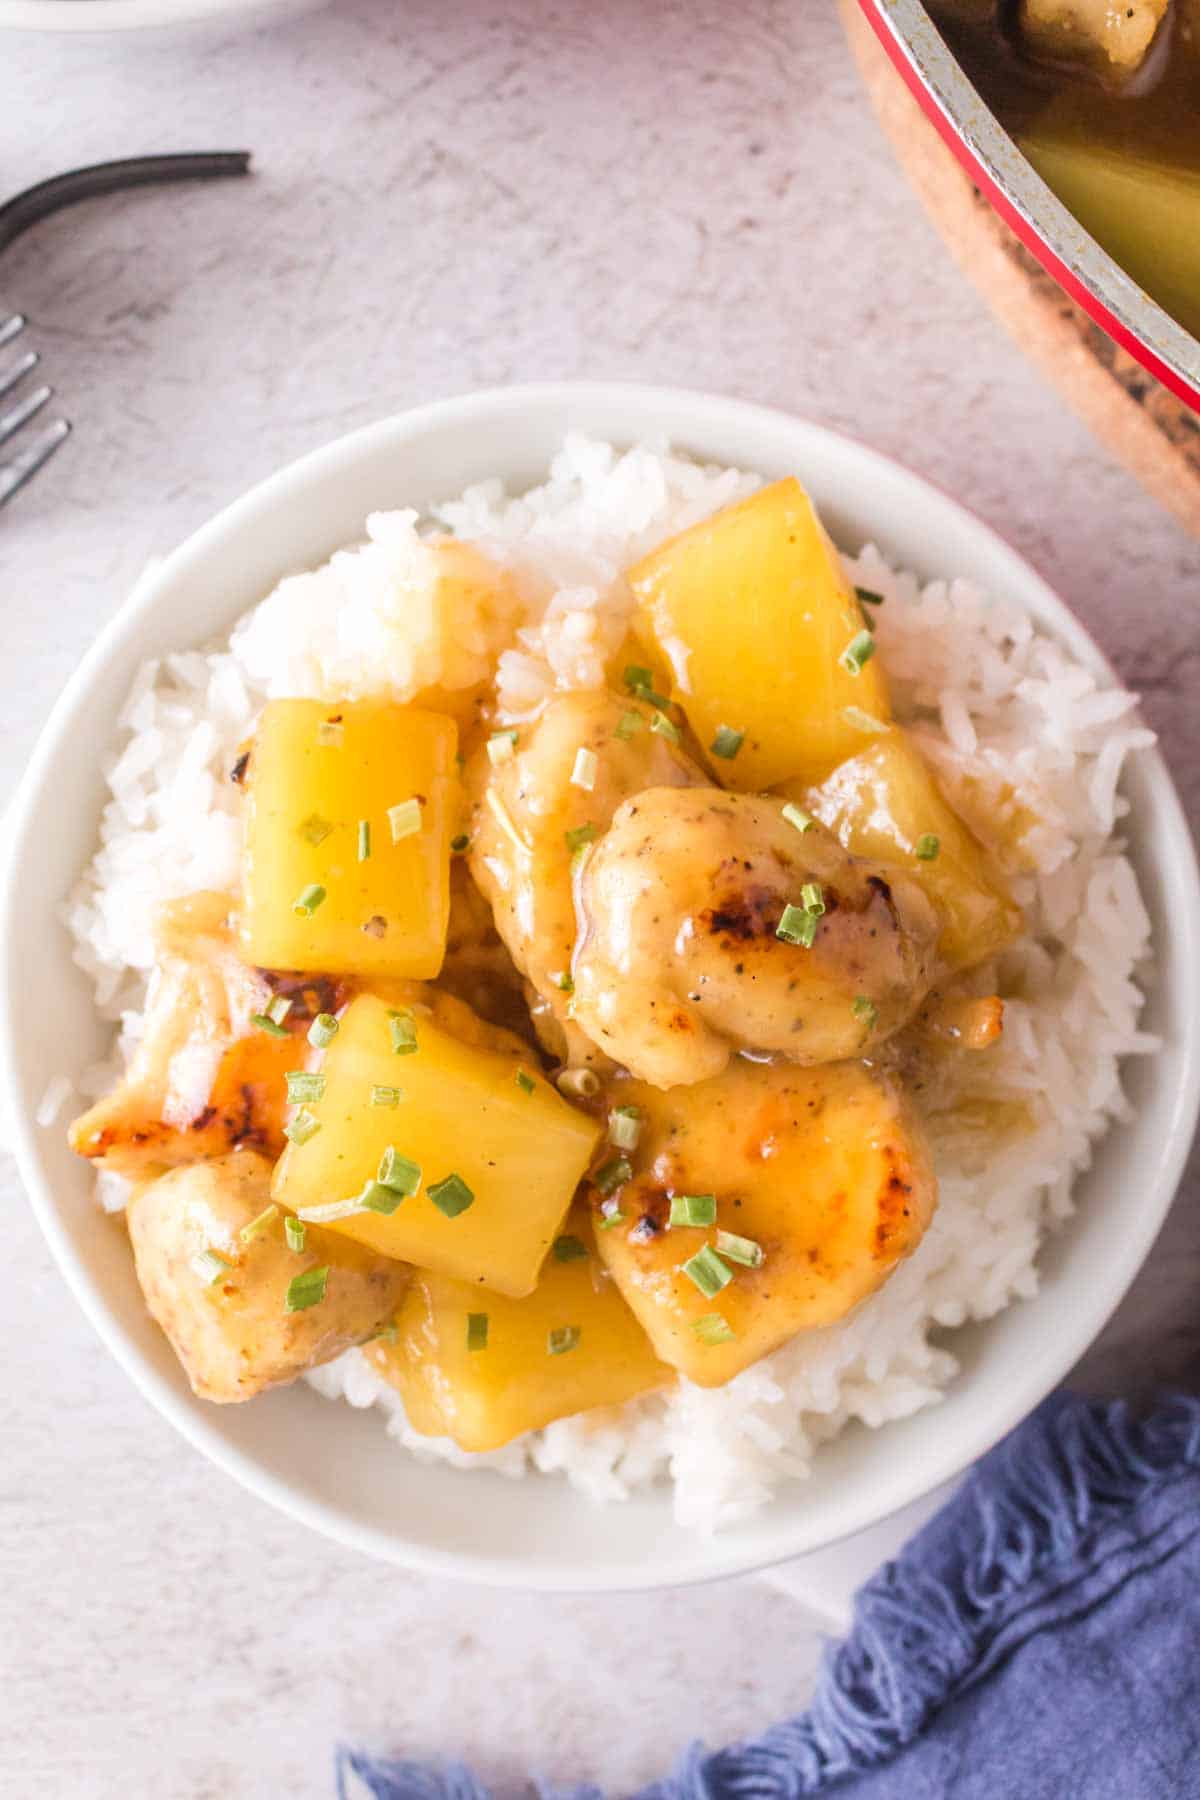 Pineapple chicken served over rice.